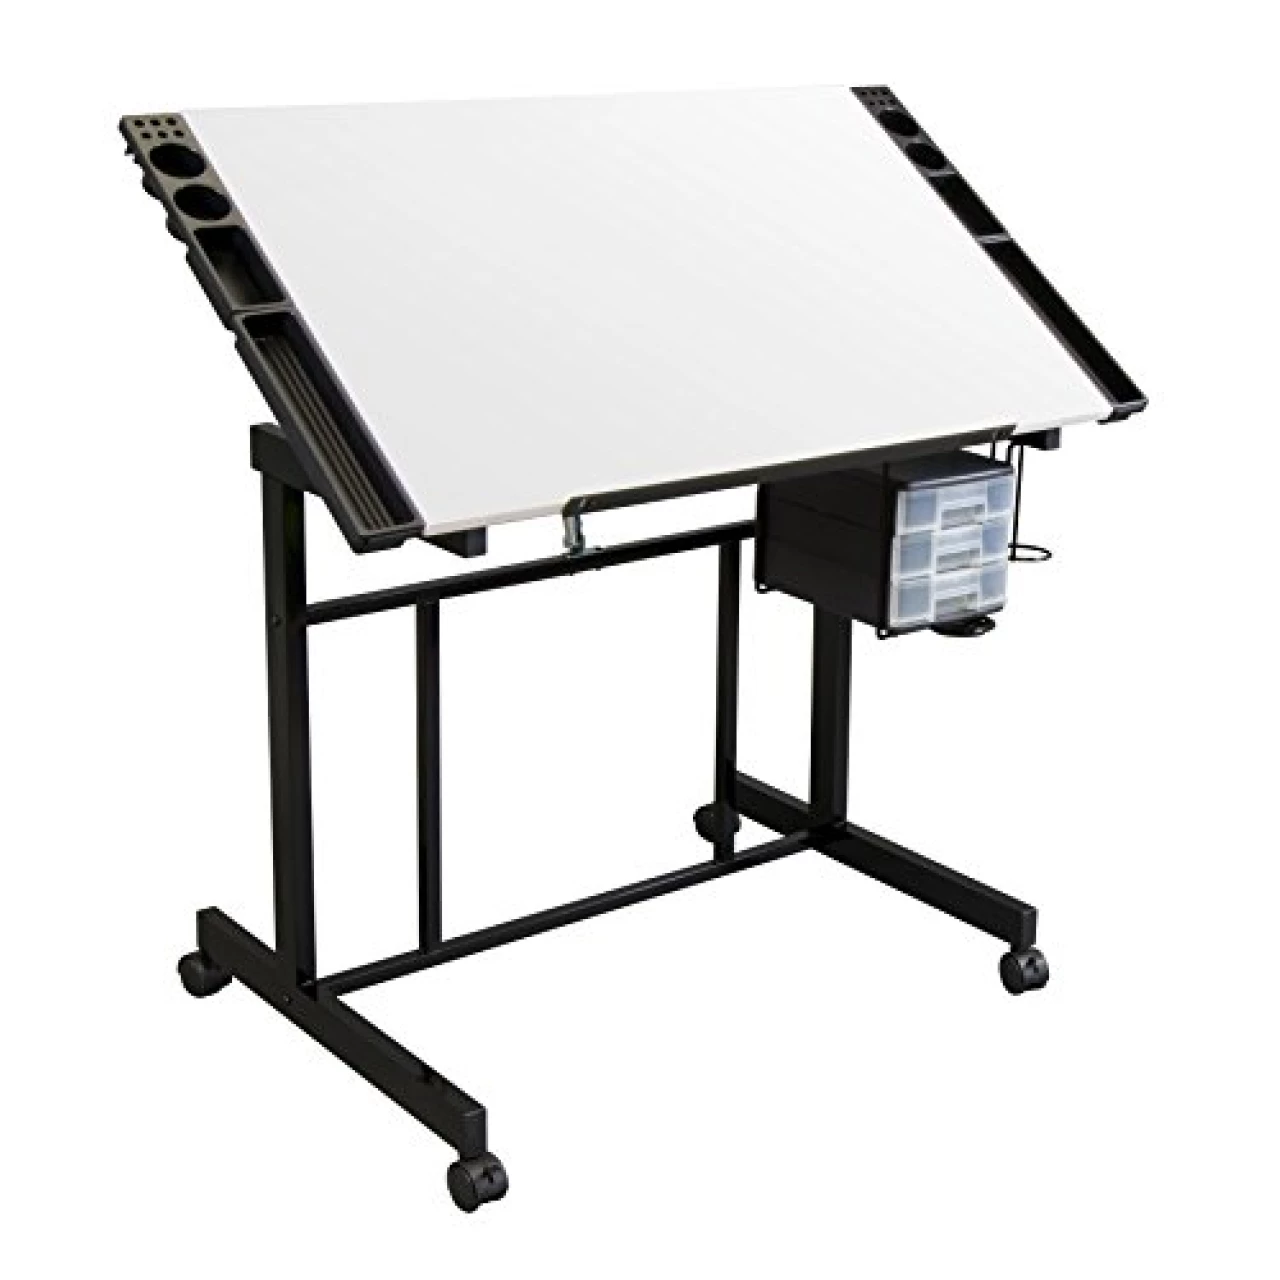 Studio Designs Deluxe Craft Station, Top Adjustable Drafting Table Craft Table Drawing Desk Hobby Table Writing Desk Studio Desk with Drawers, 36&rsquo;&lsquo;W x 24&rsquo;&lsquo;D, Black/White